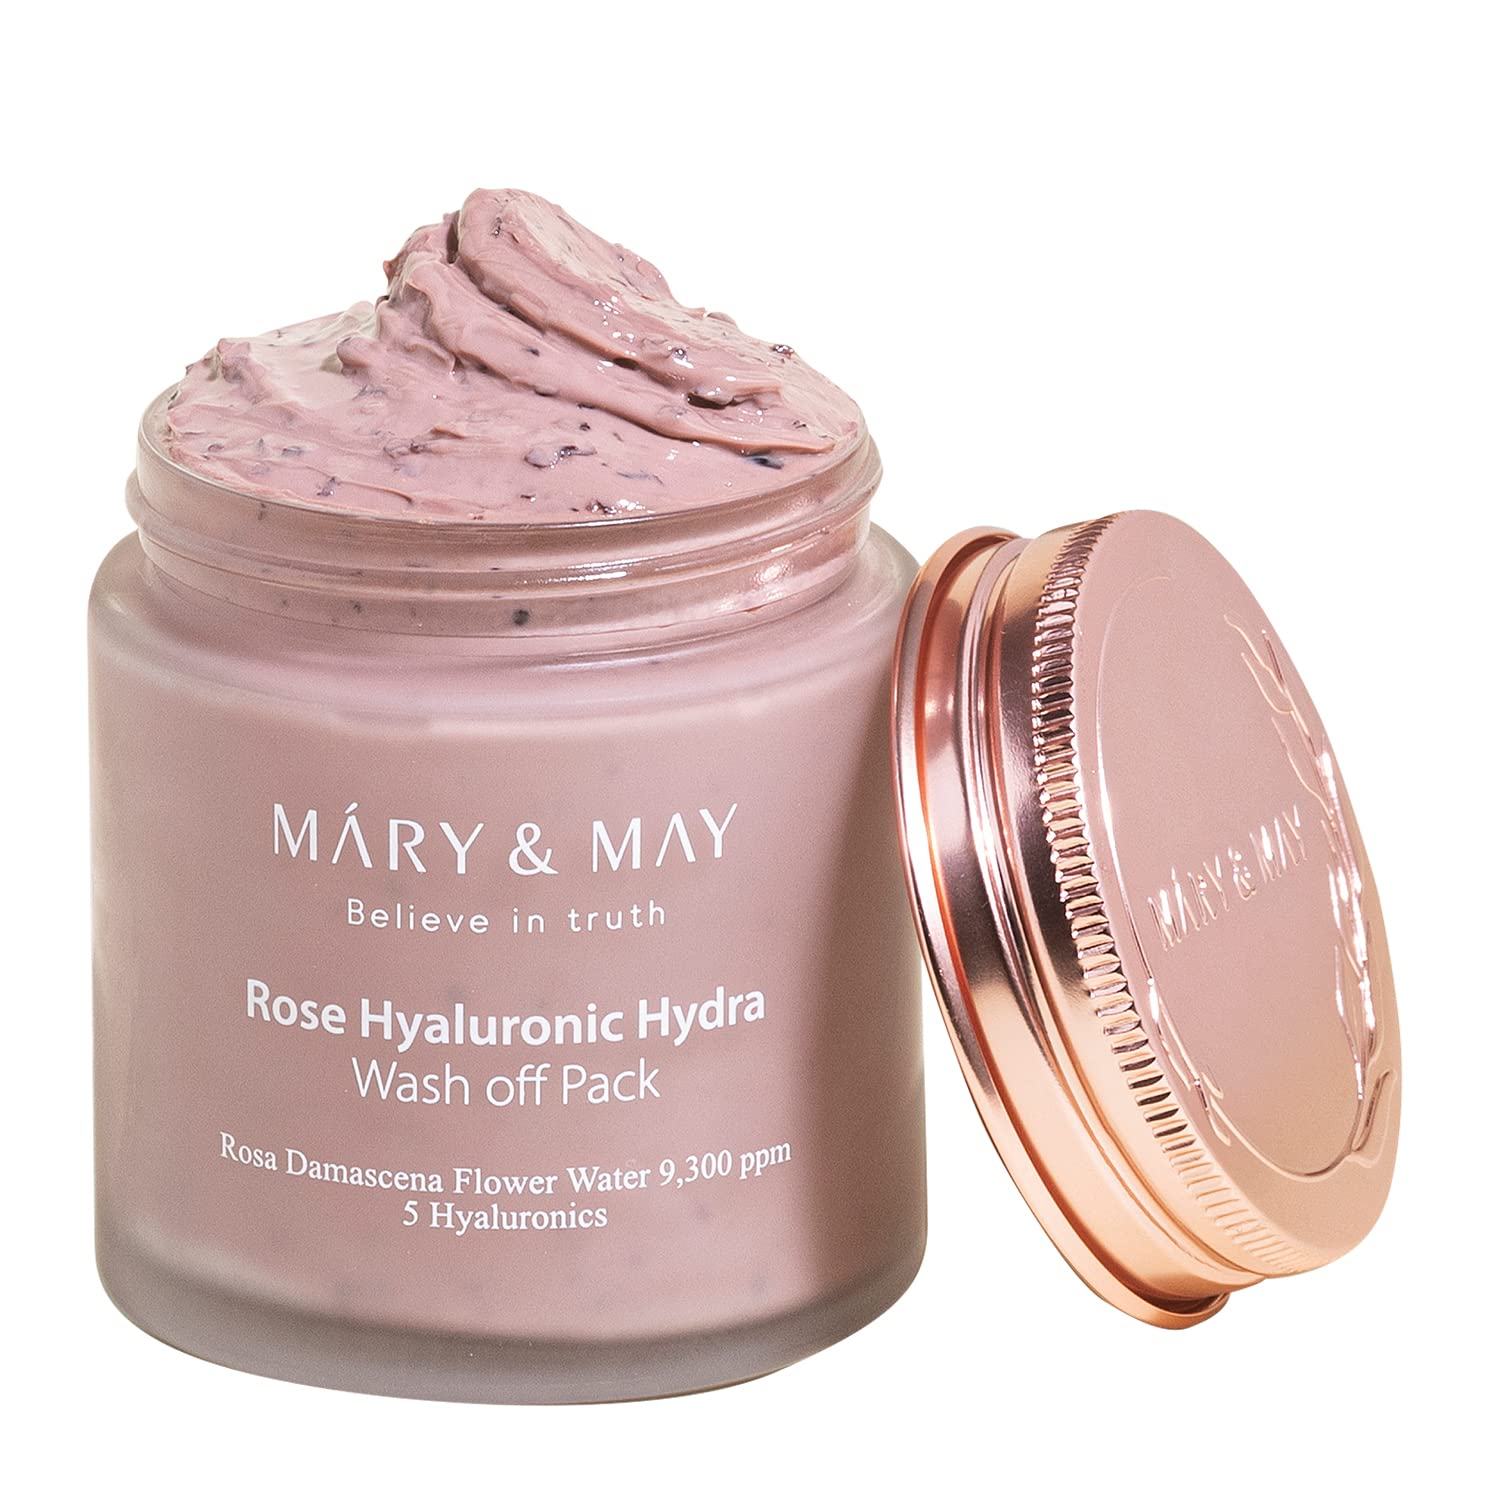 [Mary&May] Rose Hyaluronic Hydra Wash off Pack 30g & 125g